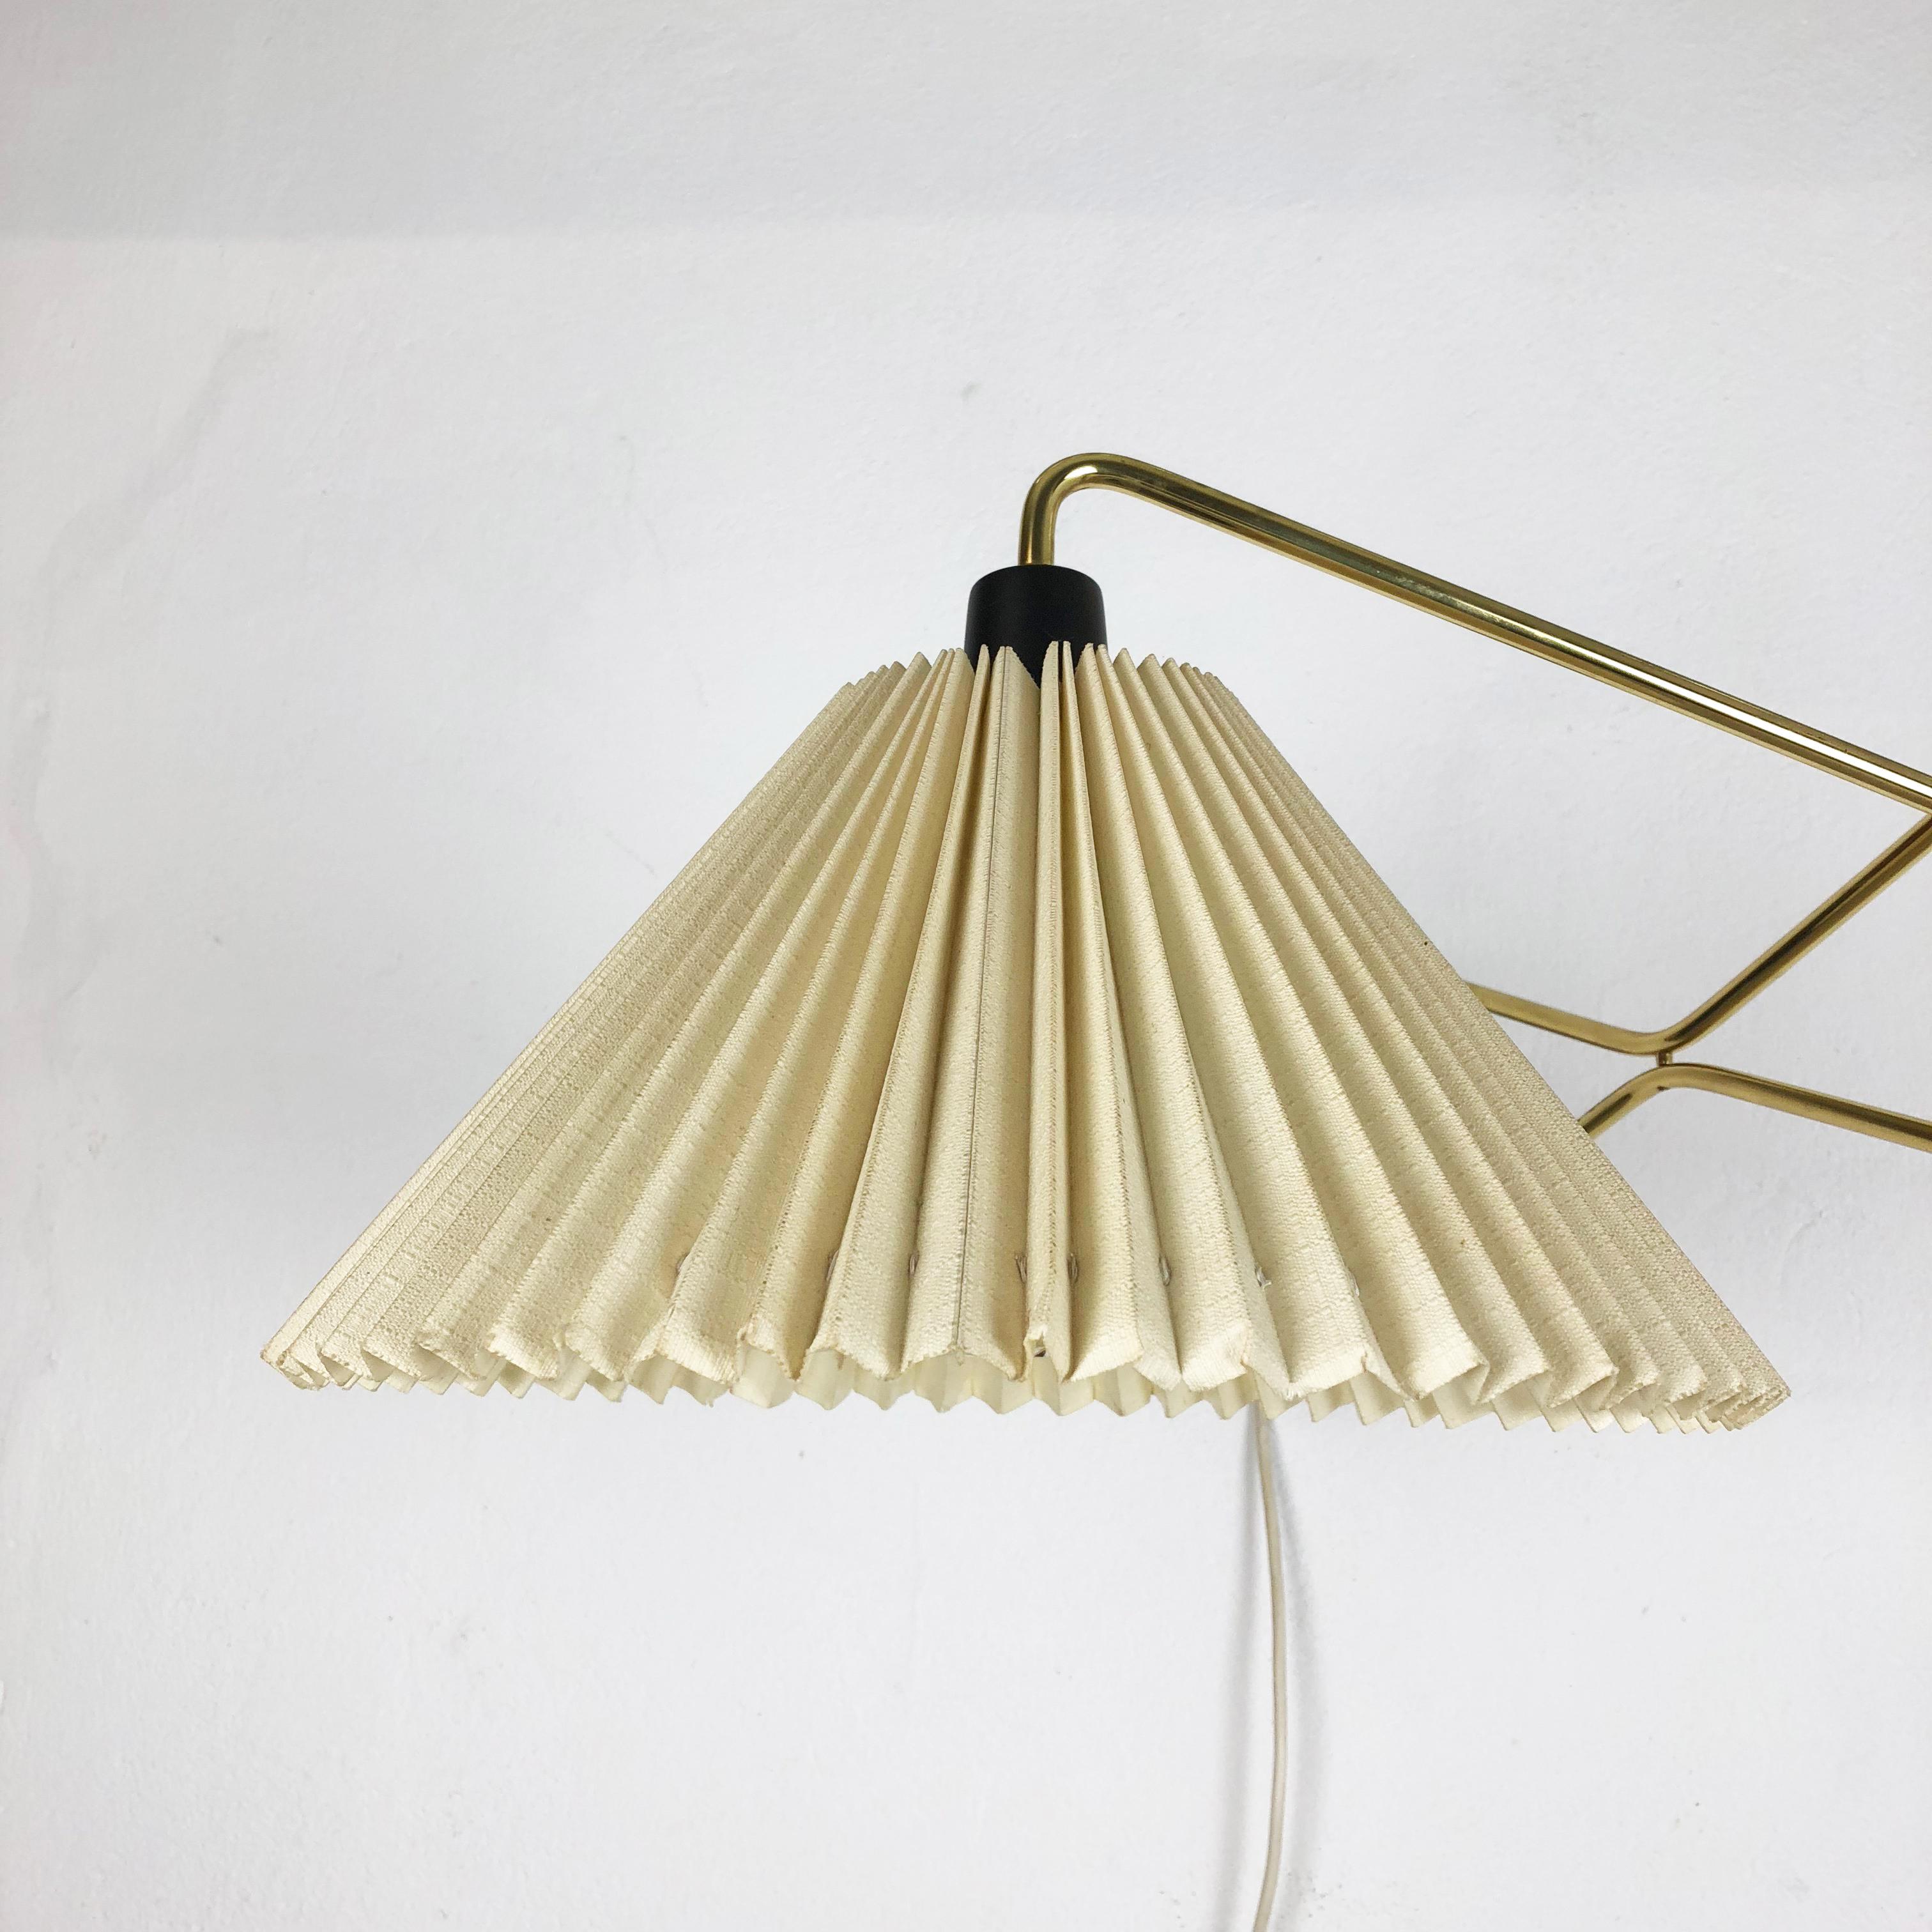 Original Modernist 1950s Brass Metal Swing Wall Light Made by Cosack, Germany 10